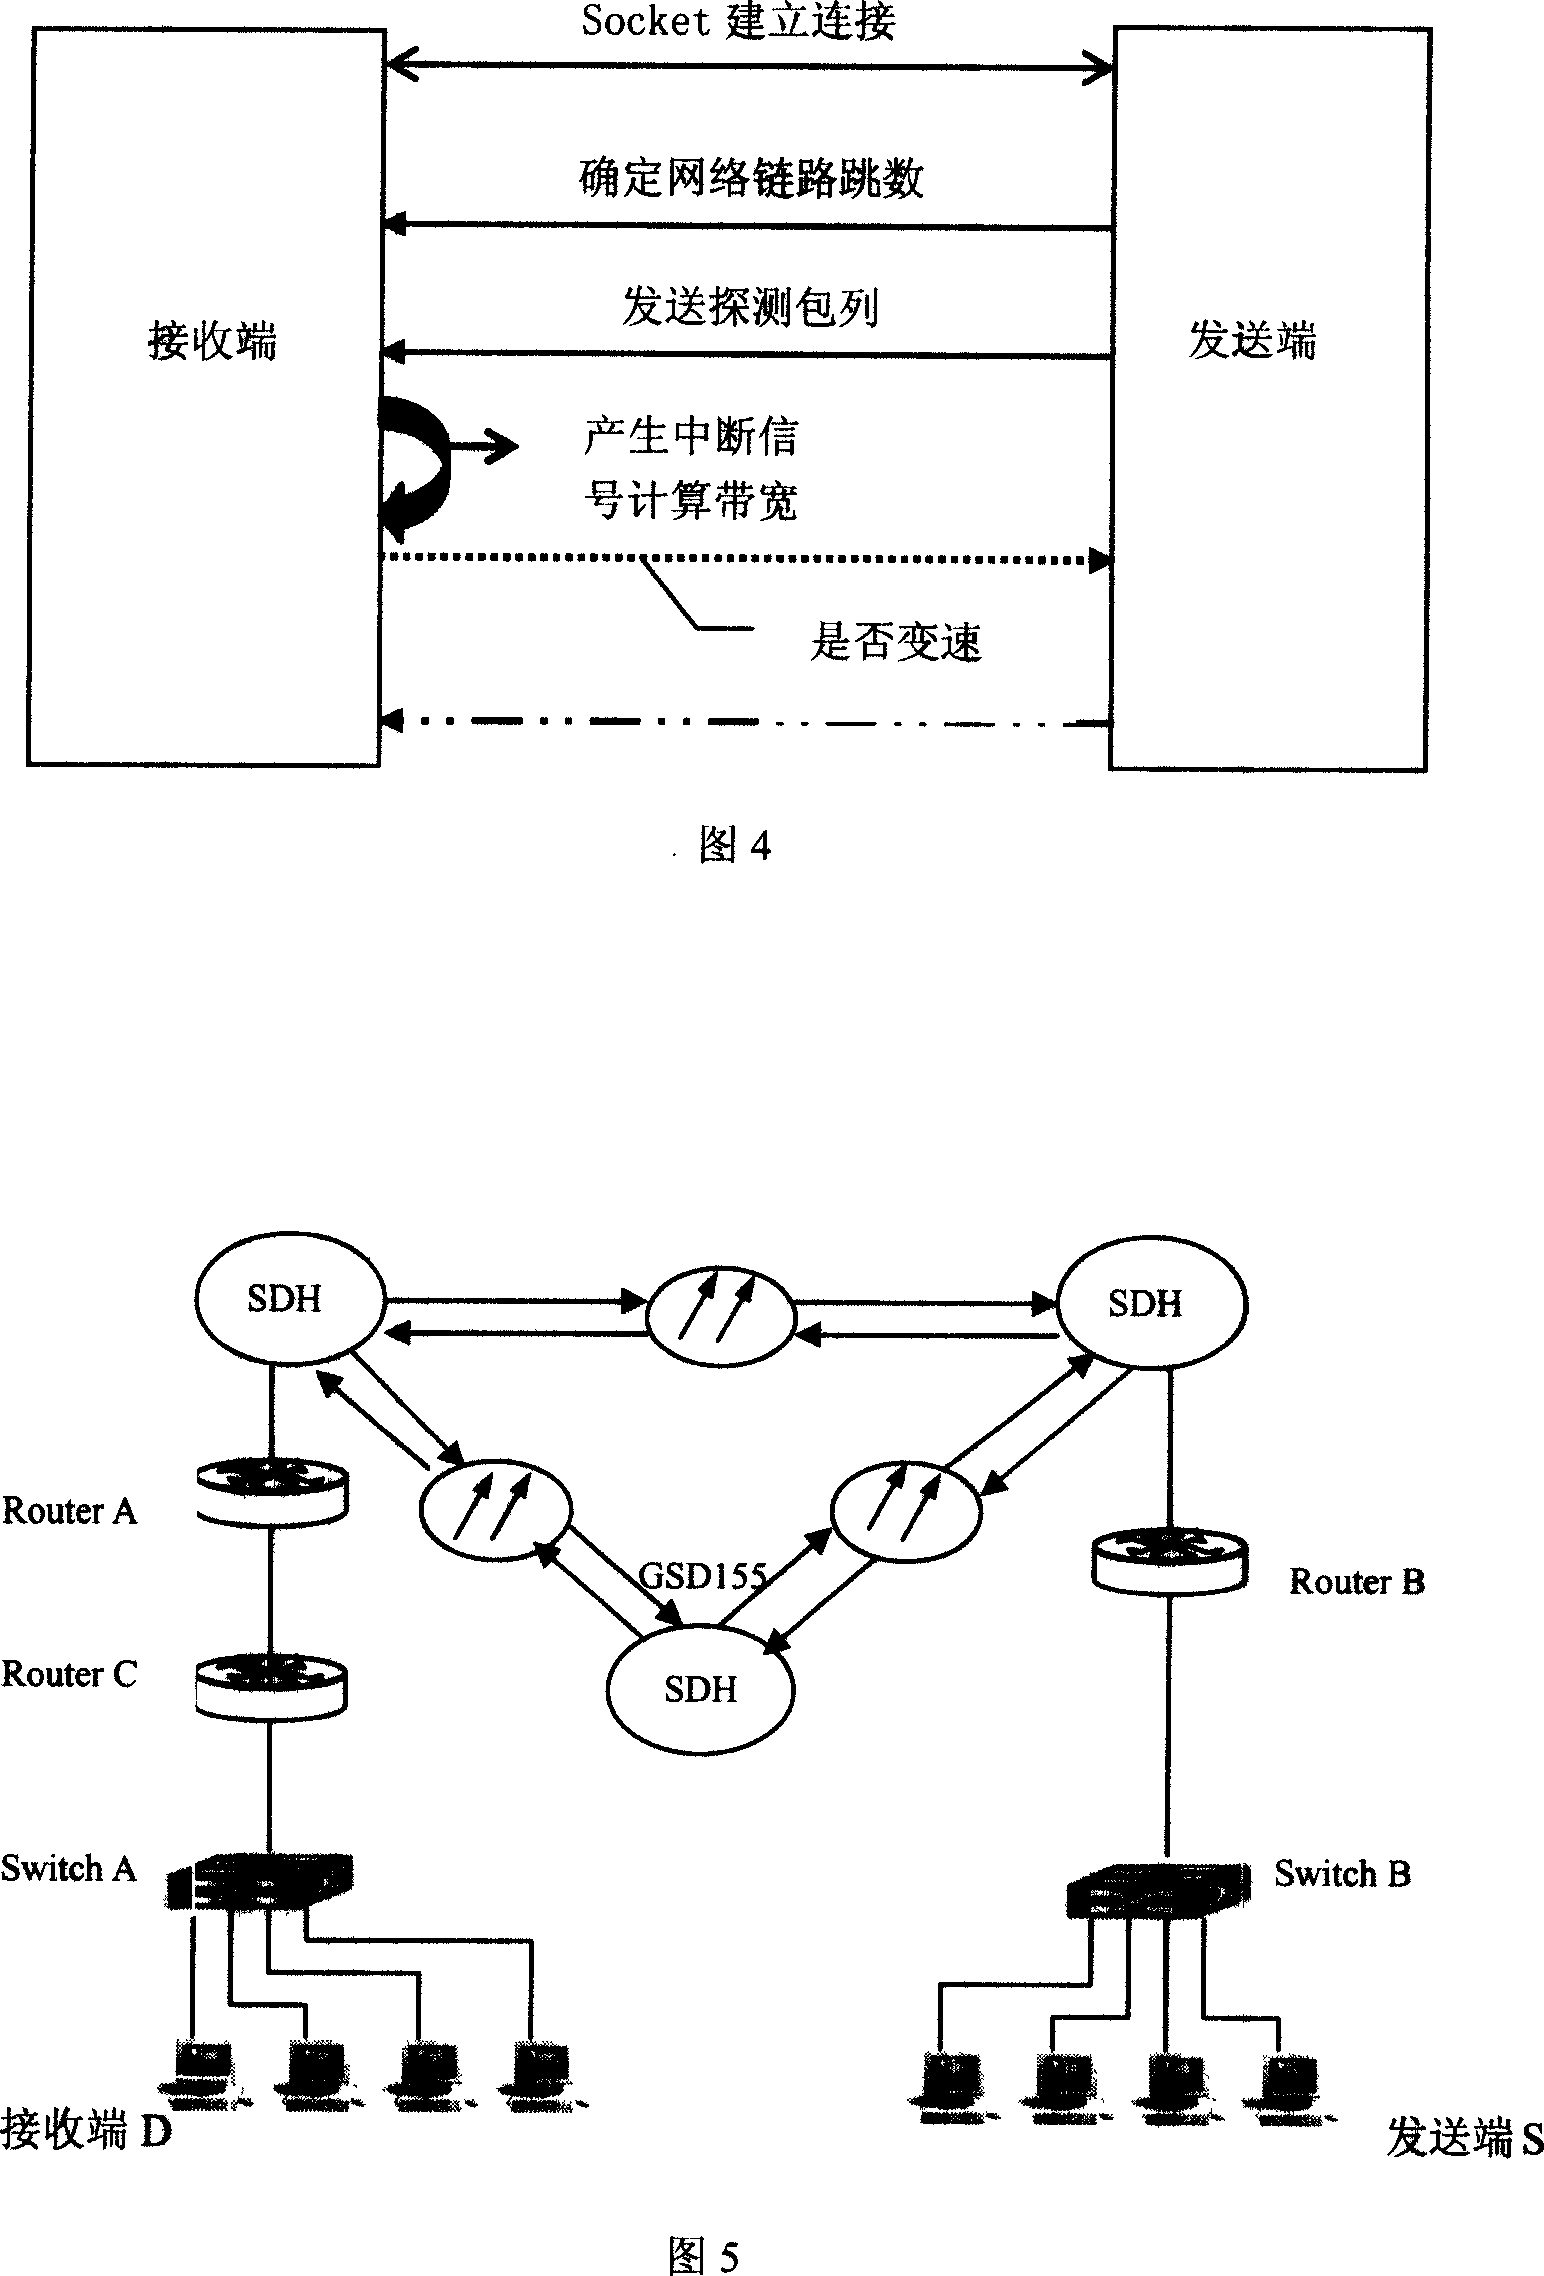 End-to-end low available bandwidth measuring method